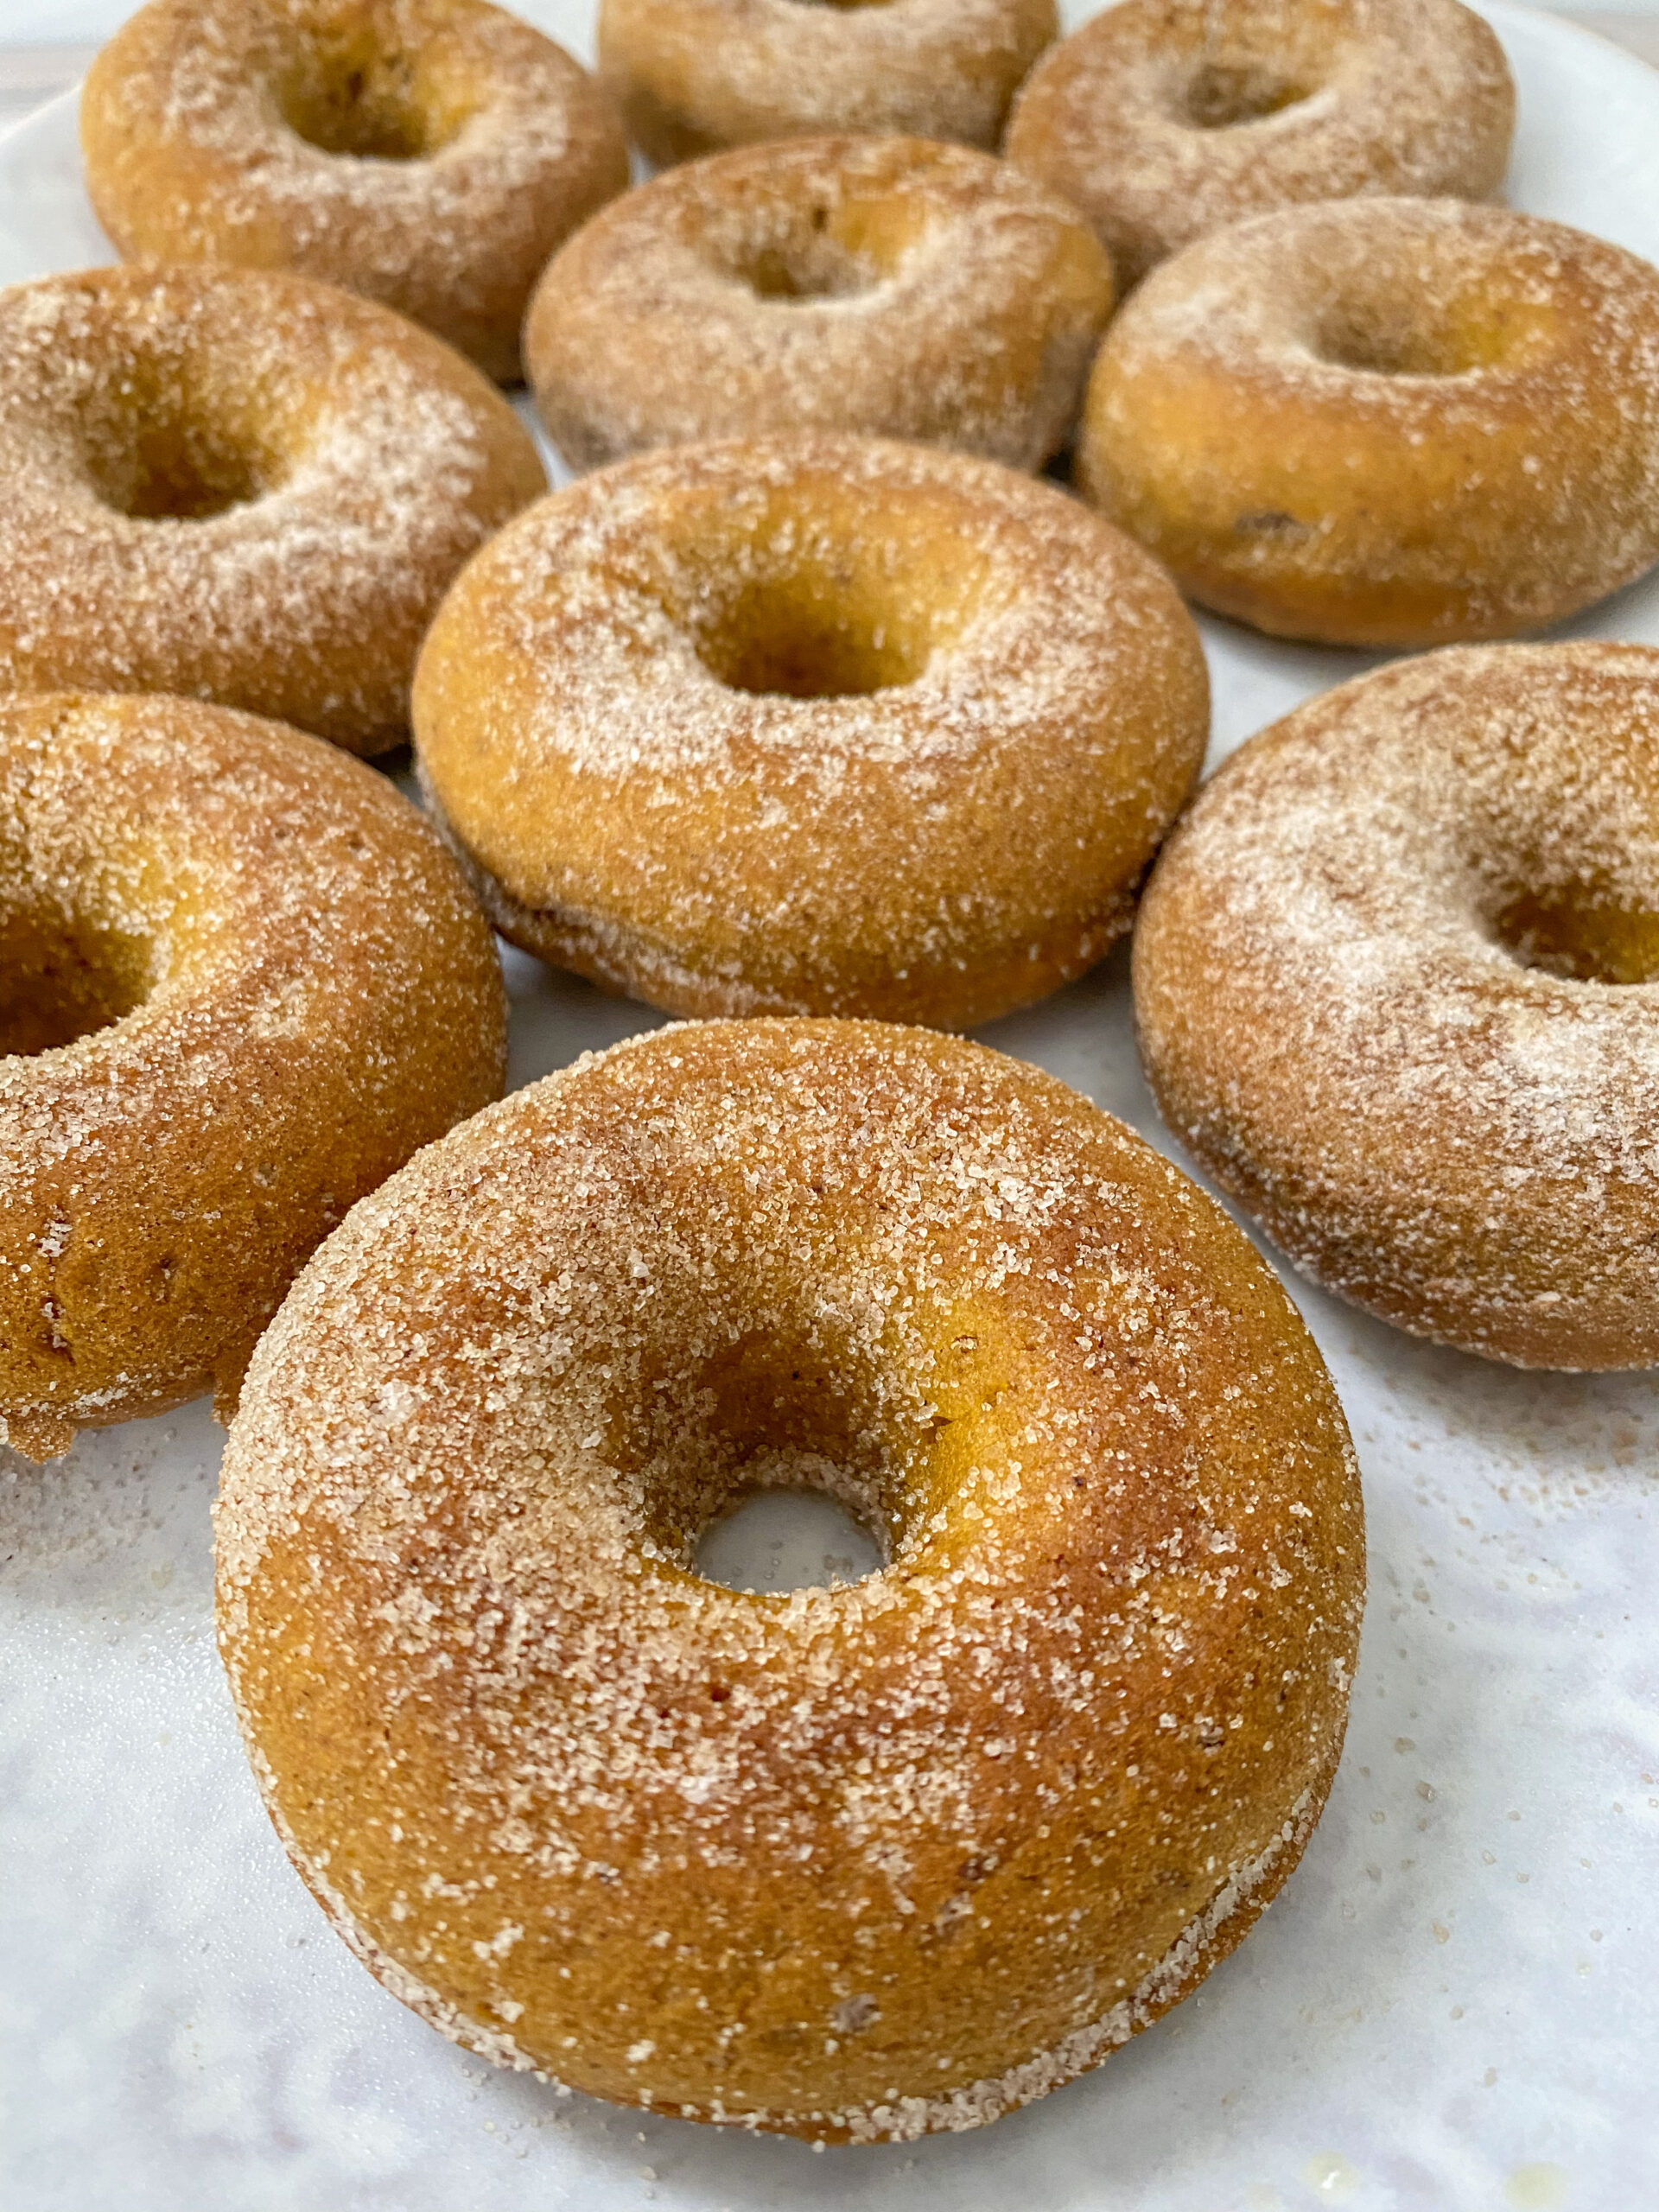 Pumpkin donuts lined up in a row.